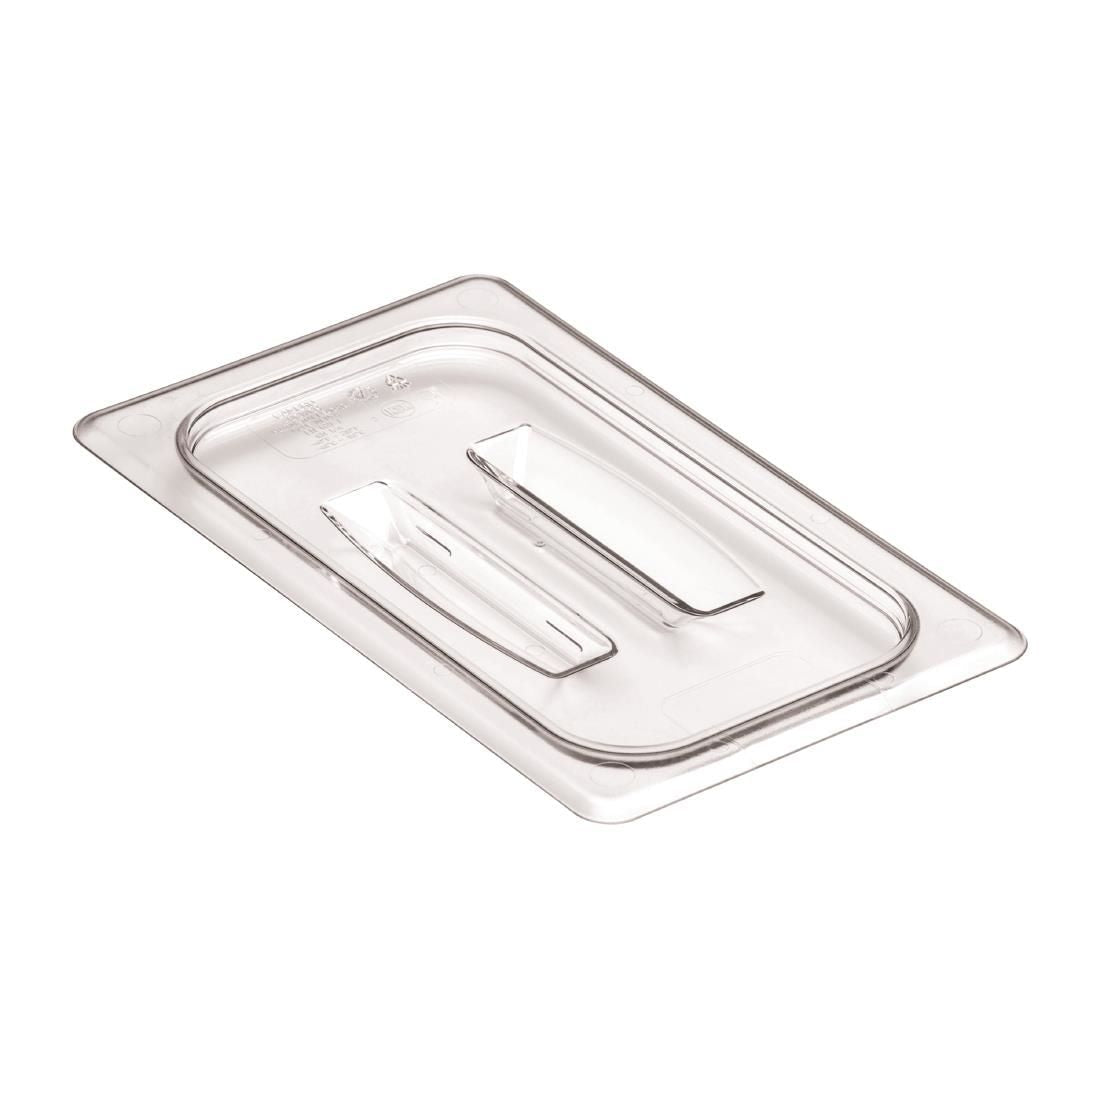 DM750 Cambro Polycarbonate 1/4 Gastronorm Pan Lid JD Catering Equipment Solutions Ltd